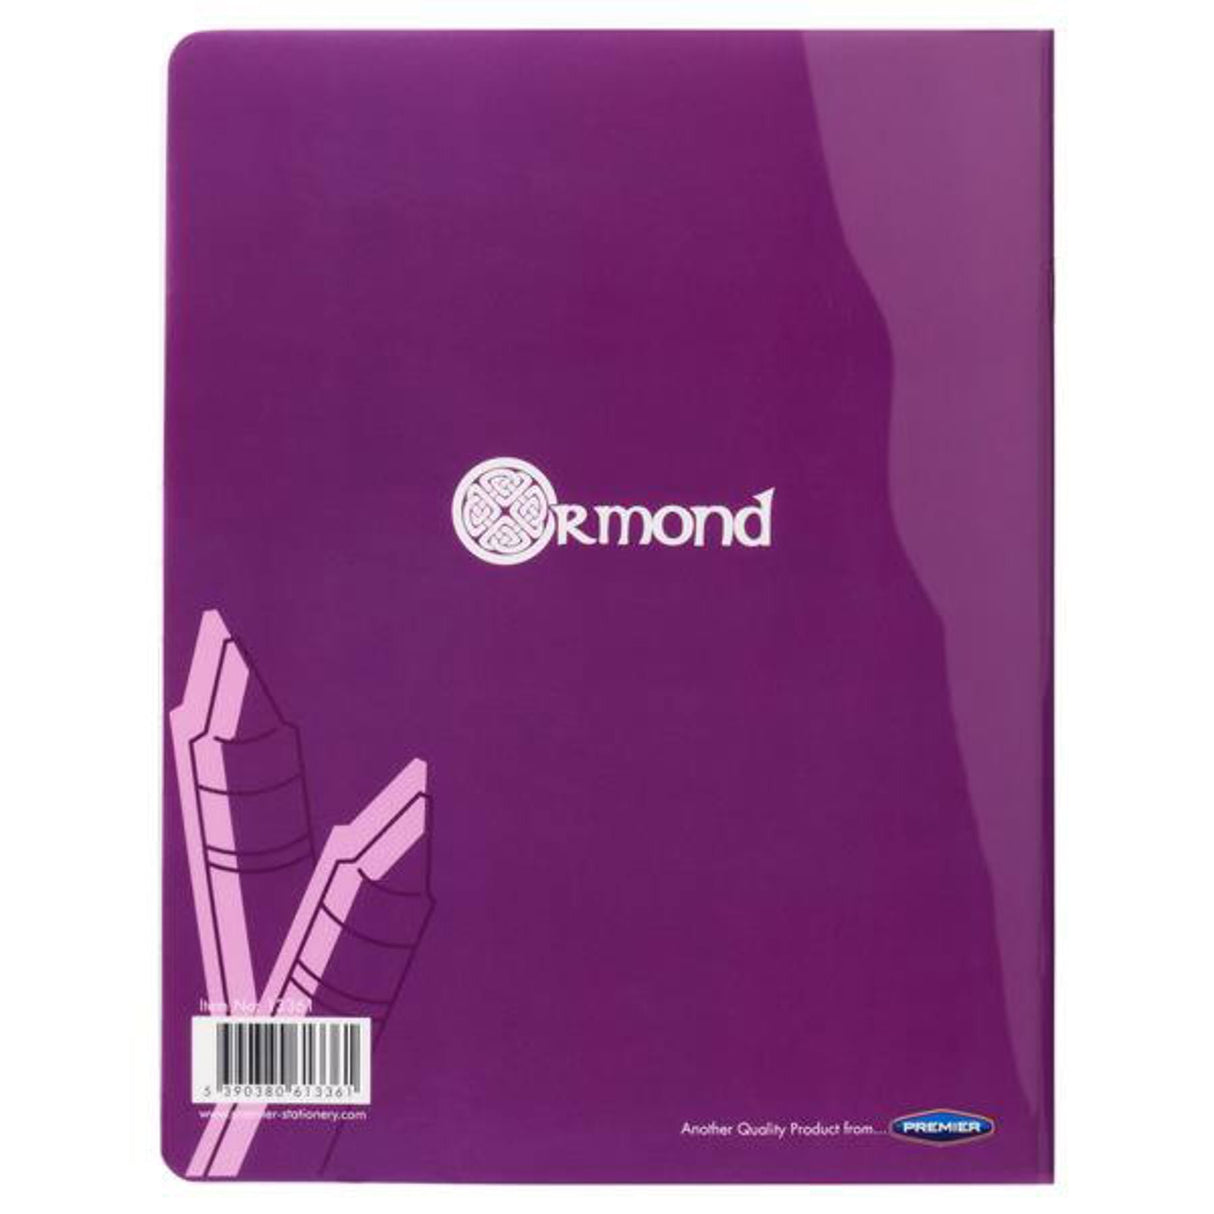 Ormond No.15 Durable Cover Project Book - Top Blank, Bottom Extra Wide Ruled - 40 Pages - Purple | Stationery Shop UK